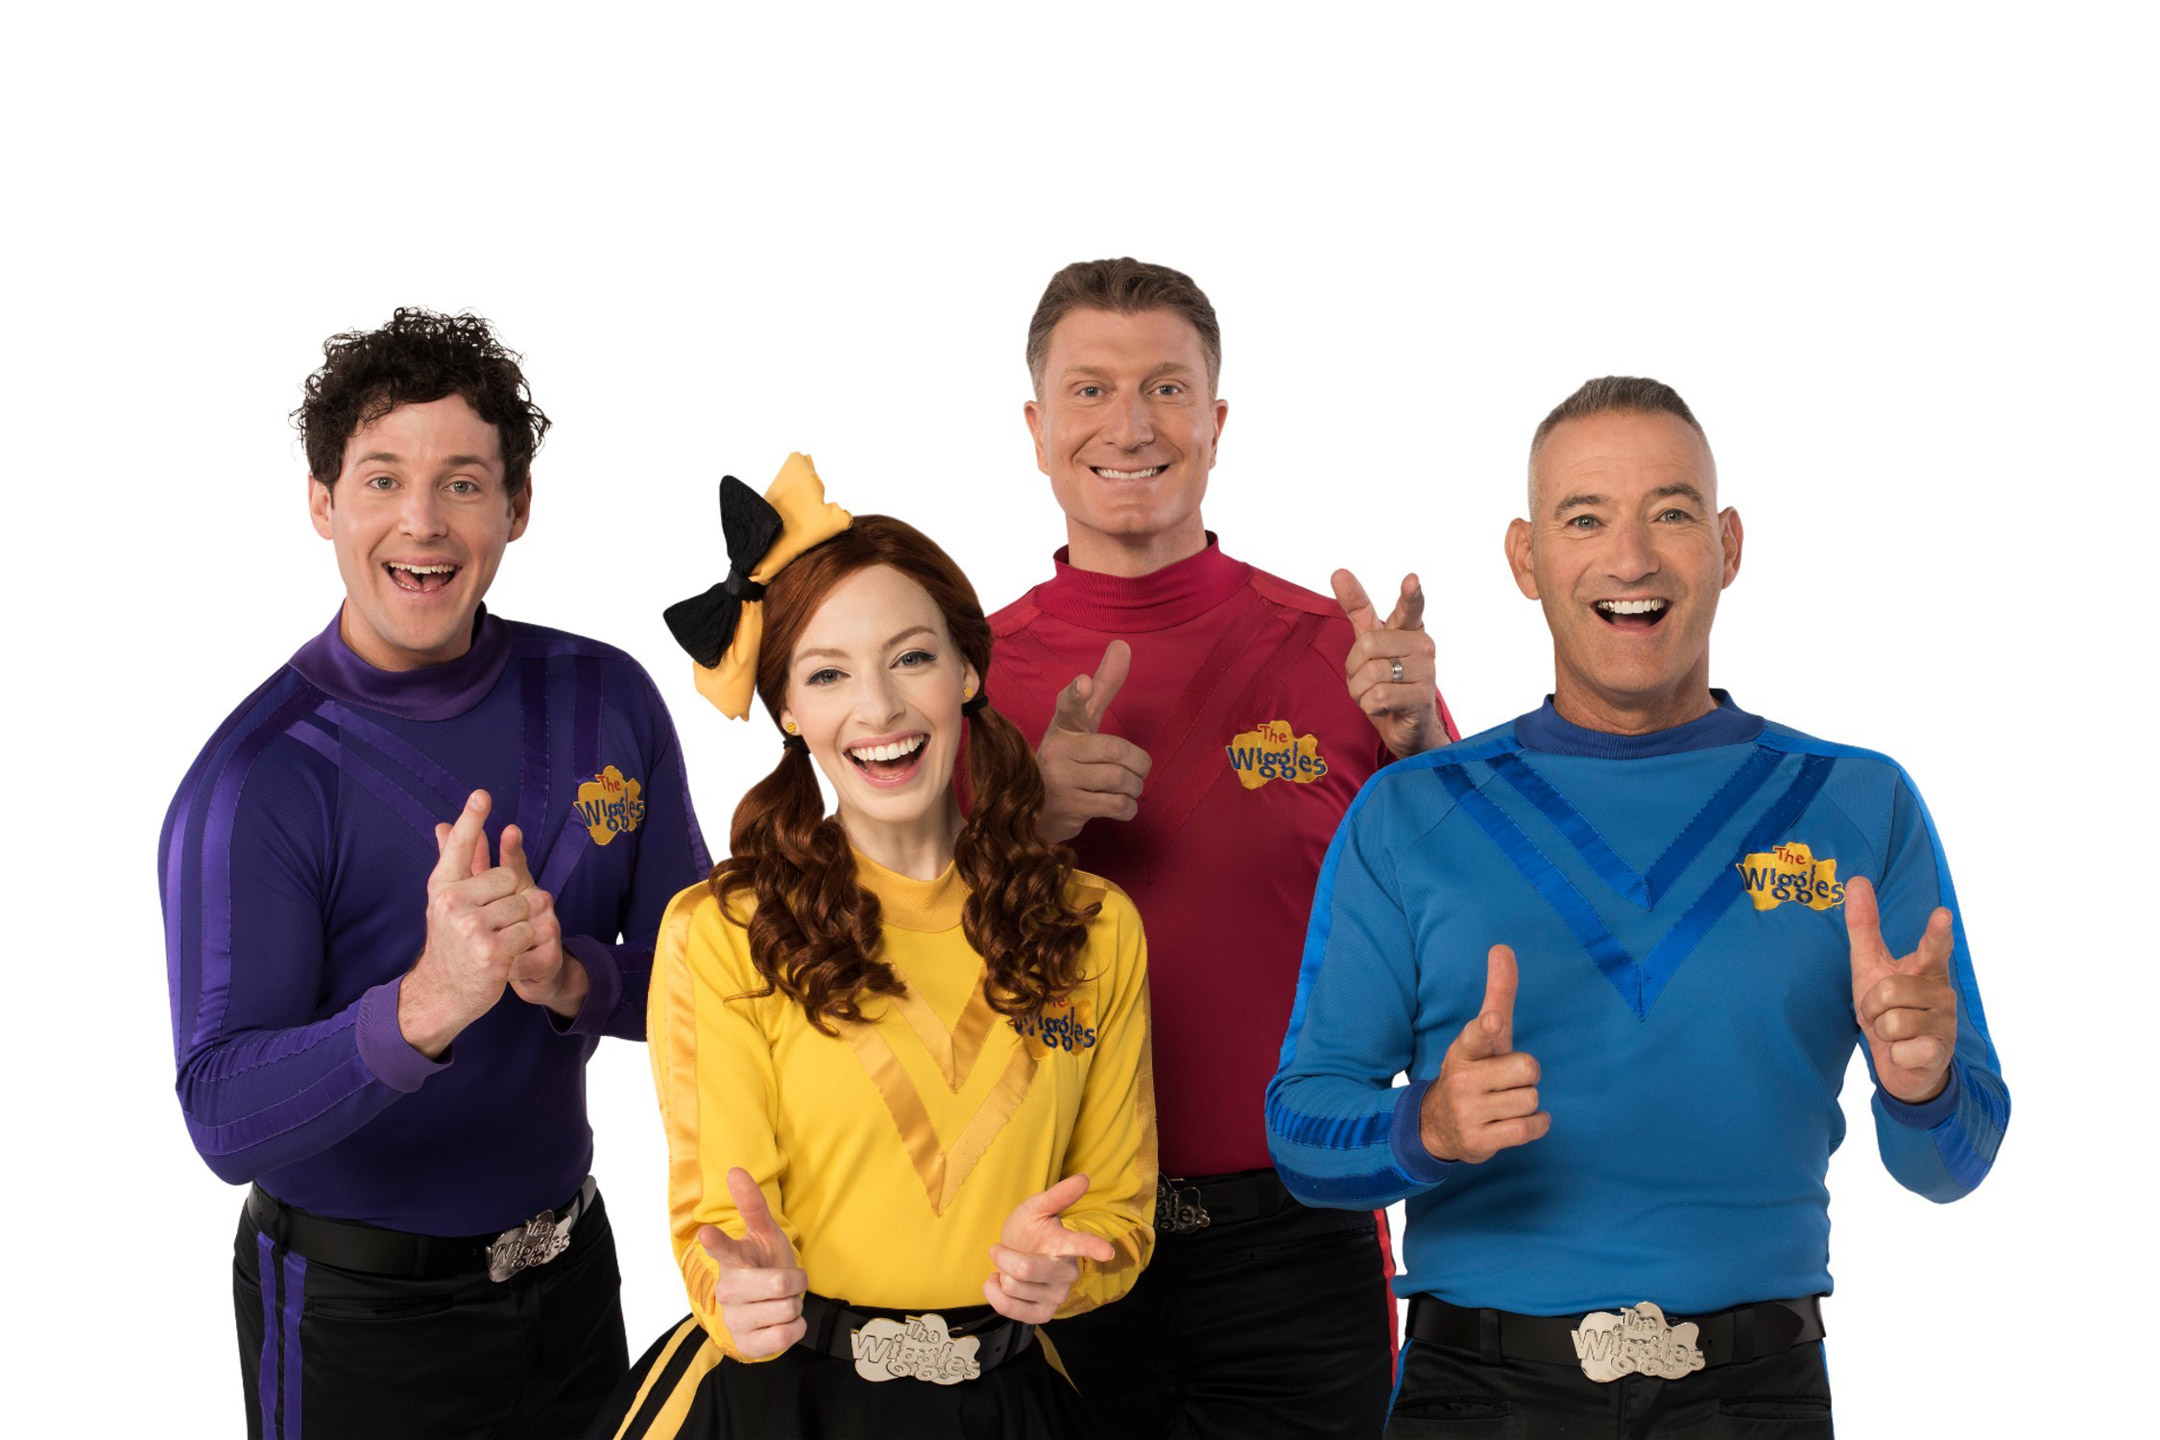 The Wiggles launch Wiggles TV and add new cast members * CHILD Magazines.